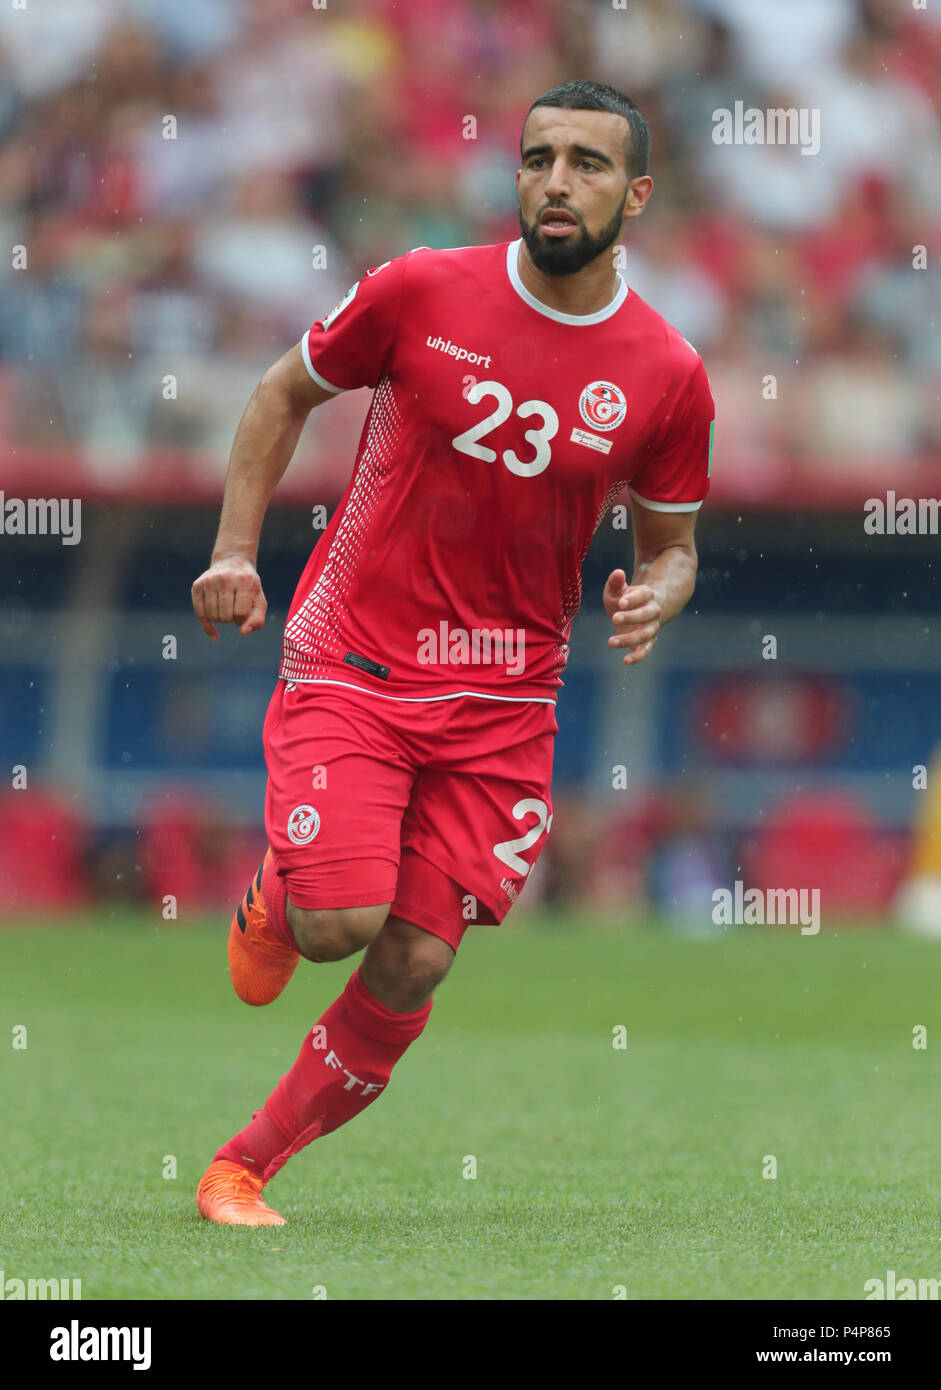 Naim Sliti BELGIUM V TUNISIA BELGIUM V TUNISIA, 2018 FIFA WORLD CUP RUSSIA 23 June 2018 GBC8570 2018 FIFA World Cup Russia Spartak Stadium Group G STRICTLY EDITORIAL USE ONLY. If The Player/Players Depicted In This Image Is/Are Playing For An English Club Or The England National Team. Then This Image May Only Be Used For Editorial Purposes. No Commercial Use. The Following Usages Are Also Restricted EVEN IF IN AN EDITORIAL CONTEXT: Use in conjuction with, or part of, any unauthorized audio, video, data, fixture lists, club/league logos, Betting, Games or any 'live' services. Stock Photo